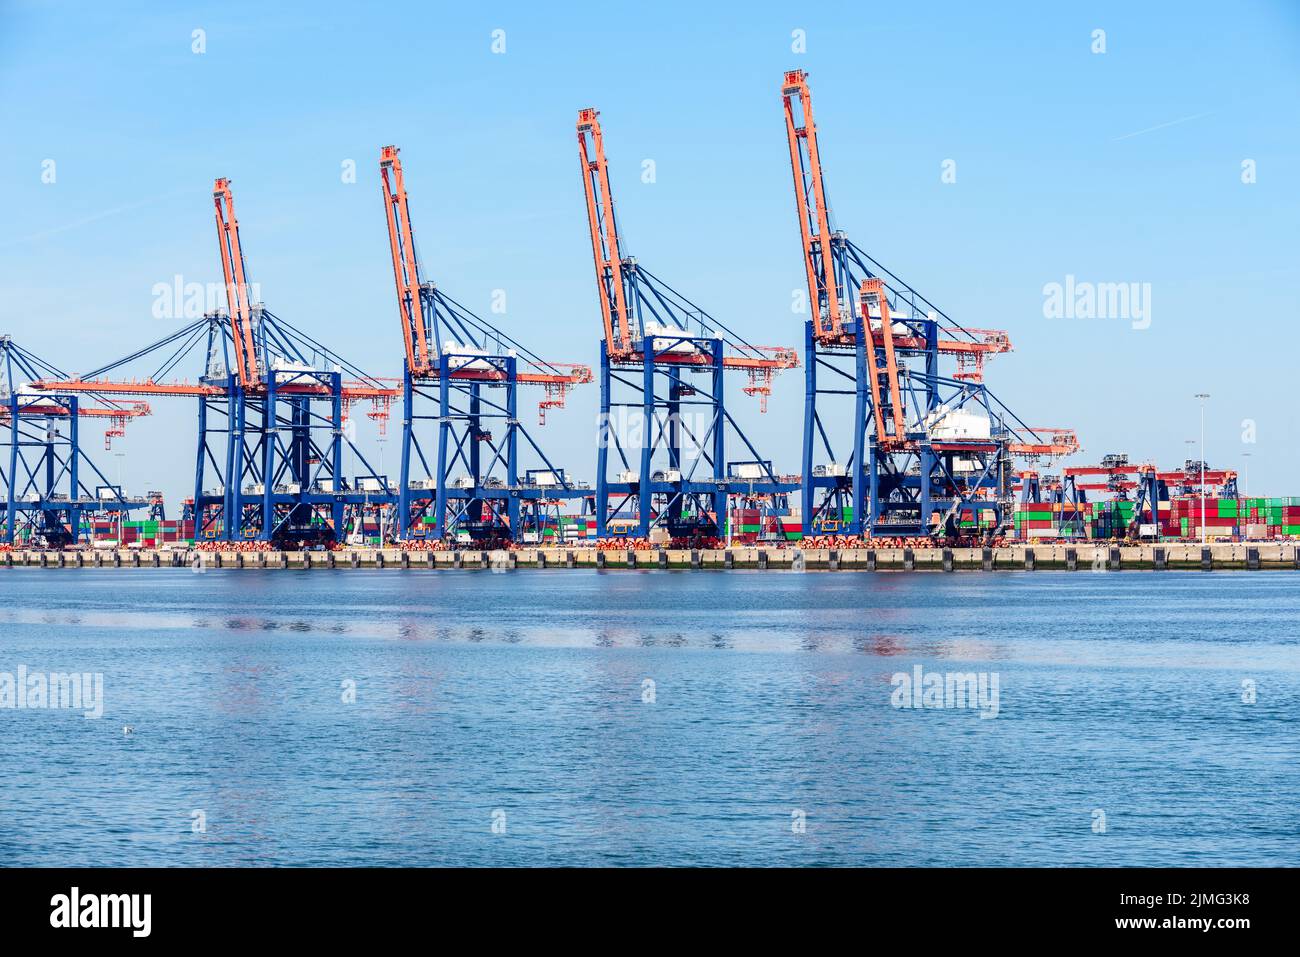 Tall gantry cranes on a commercial dock on a sunny summer day. Stacks of colourful containers are visible in background. Stock Photo